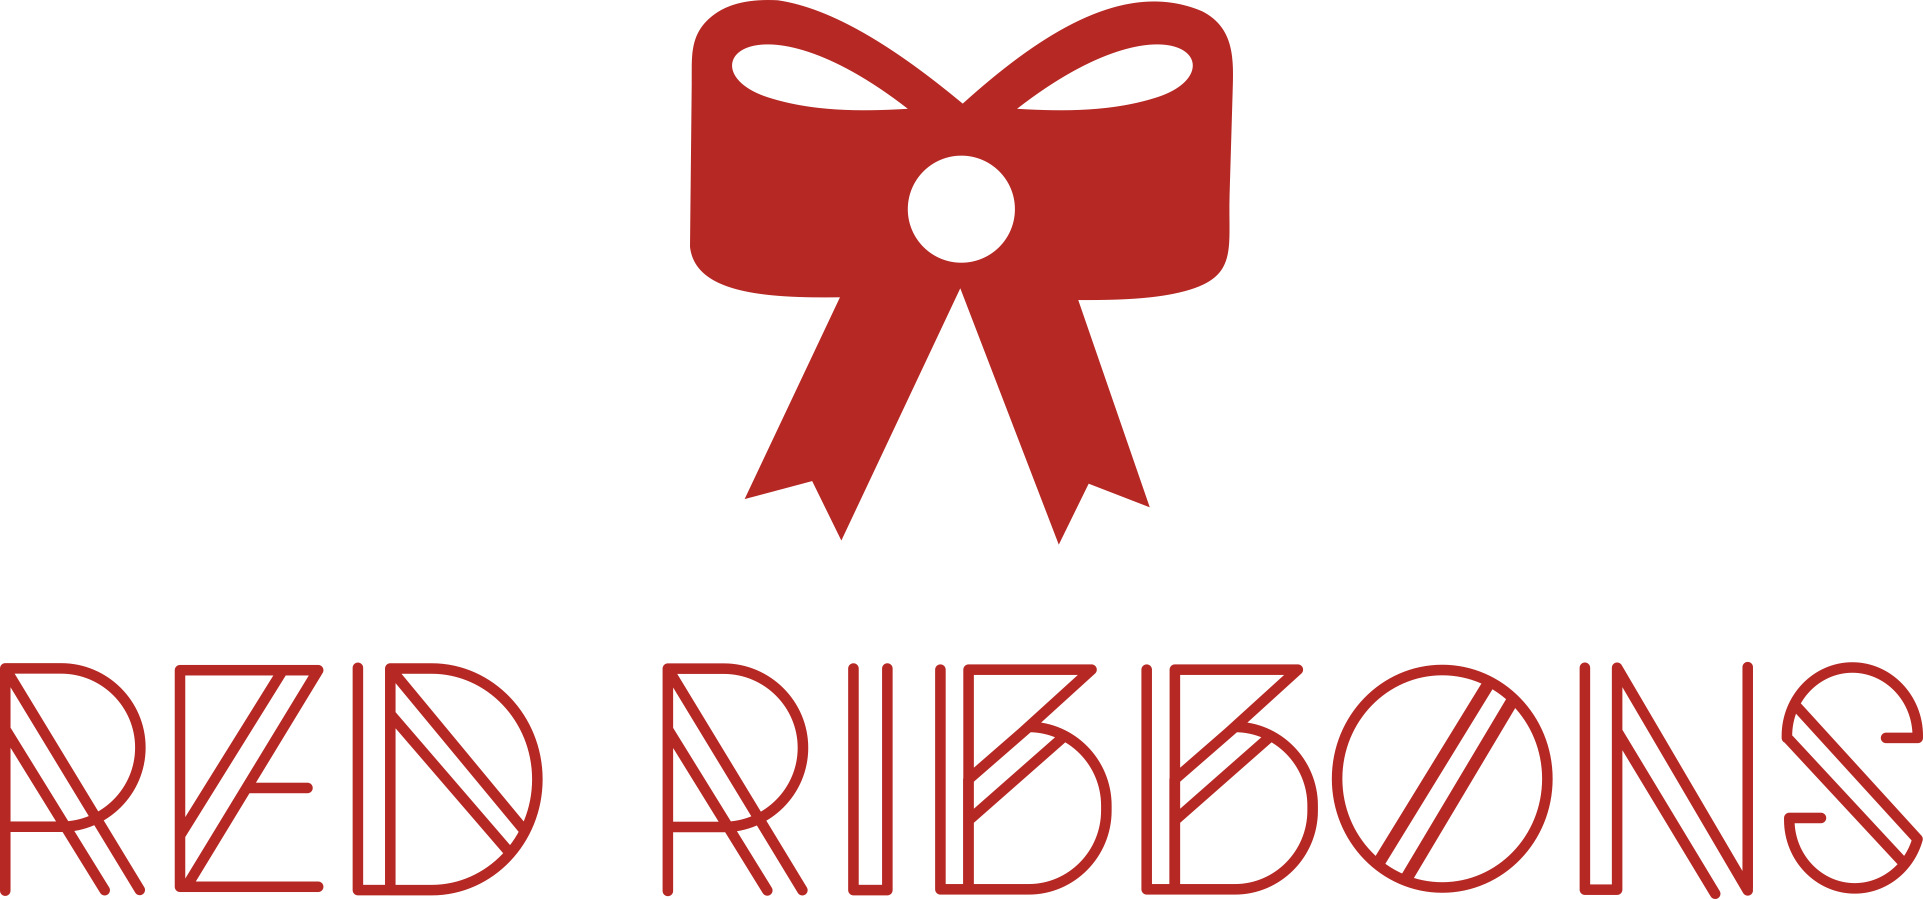 Red Ribbons - Corporate Gifts